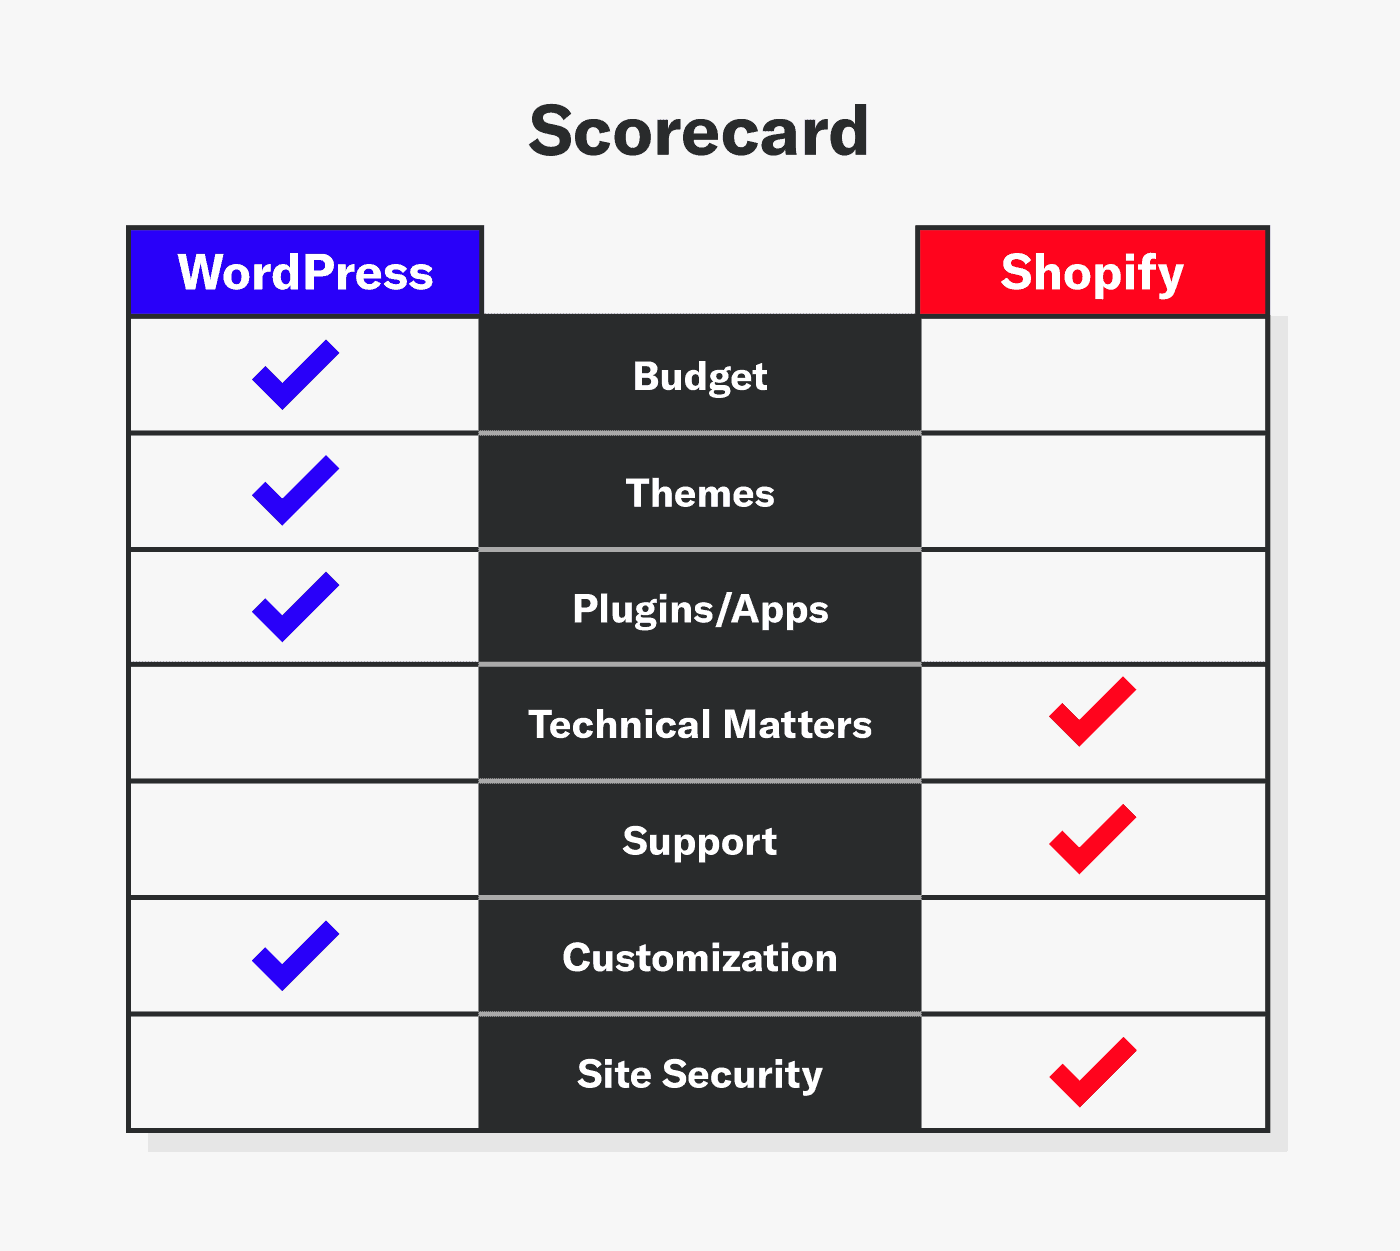 WordPress beats Shopify in this comparison